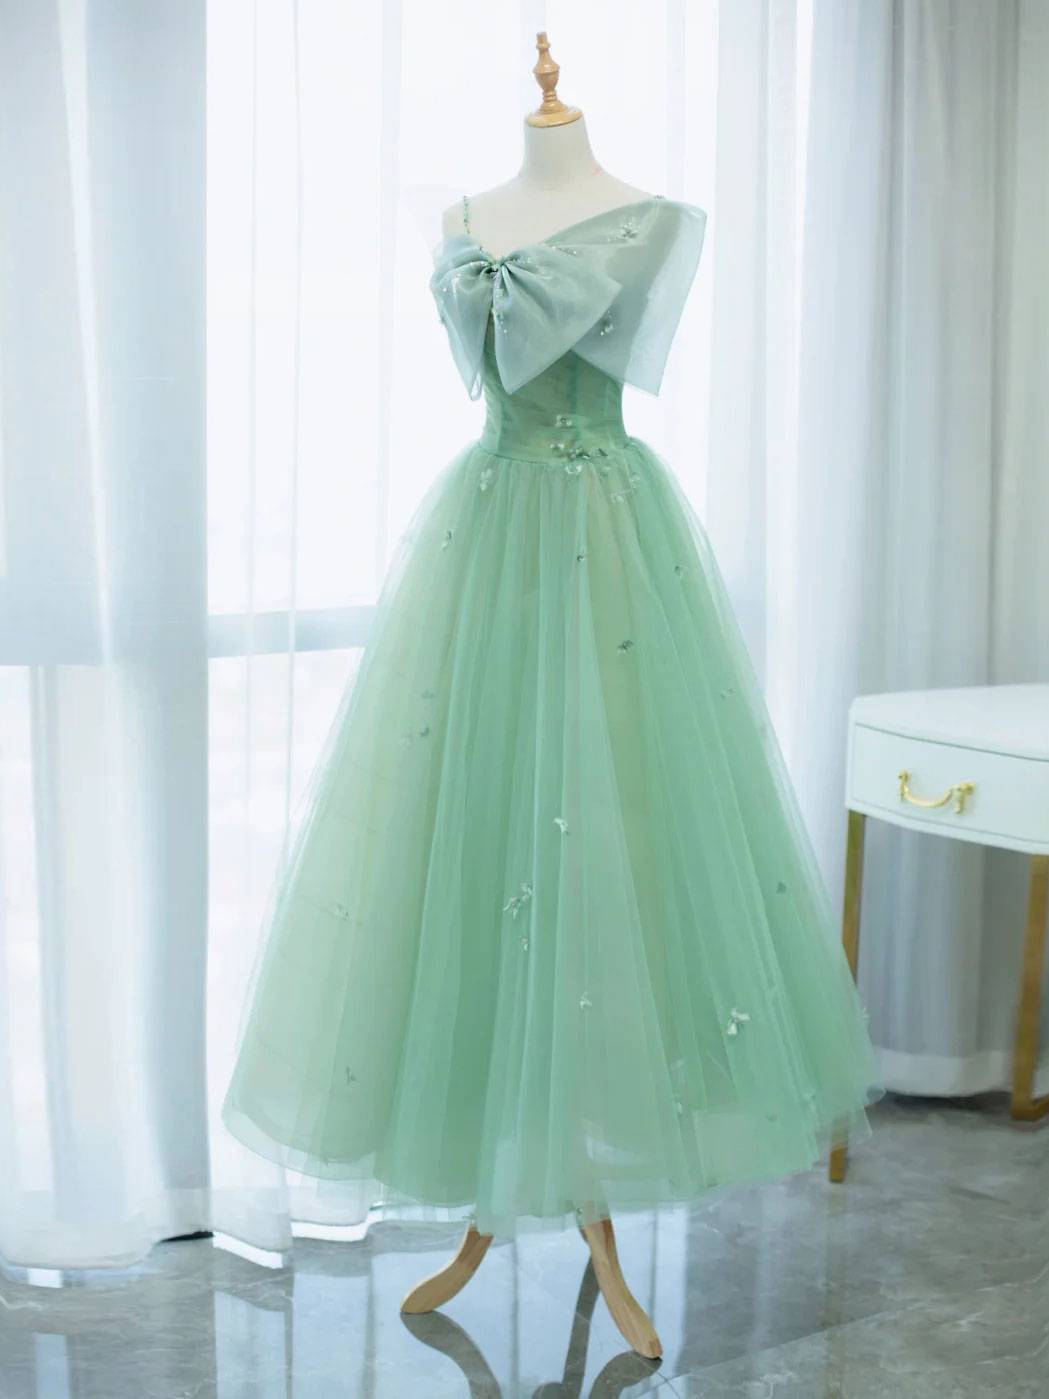 Simple Green Tulle Tea Length Corset Prom Dress, Green Tulle Corset Homecoming Dresses outfit, Party Dresses Teen